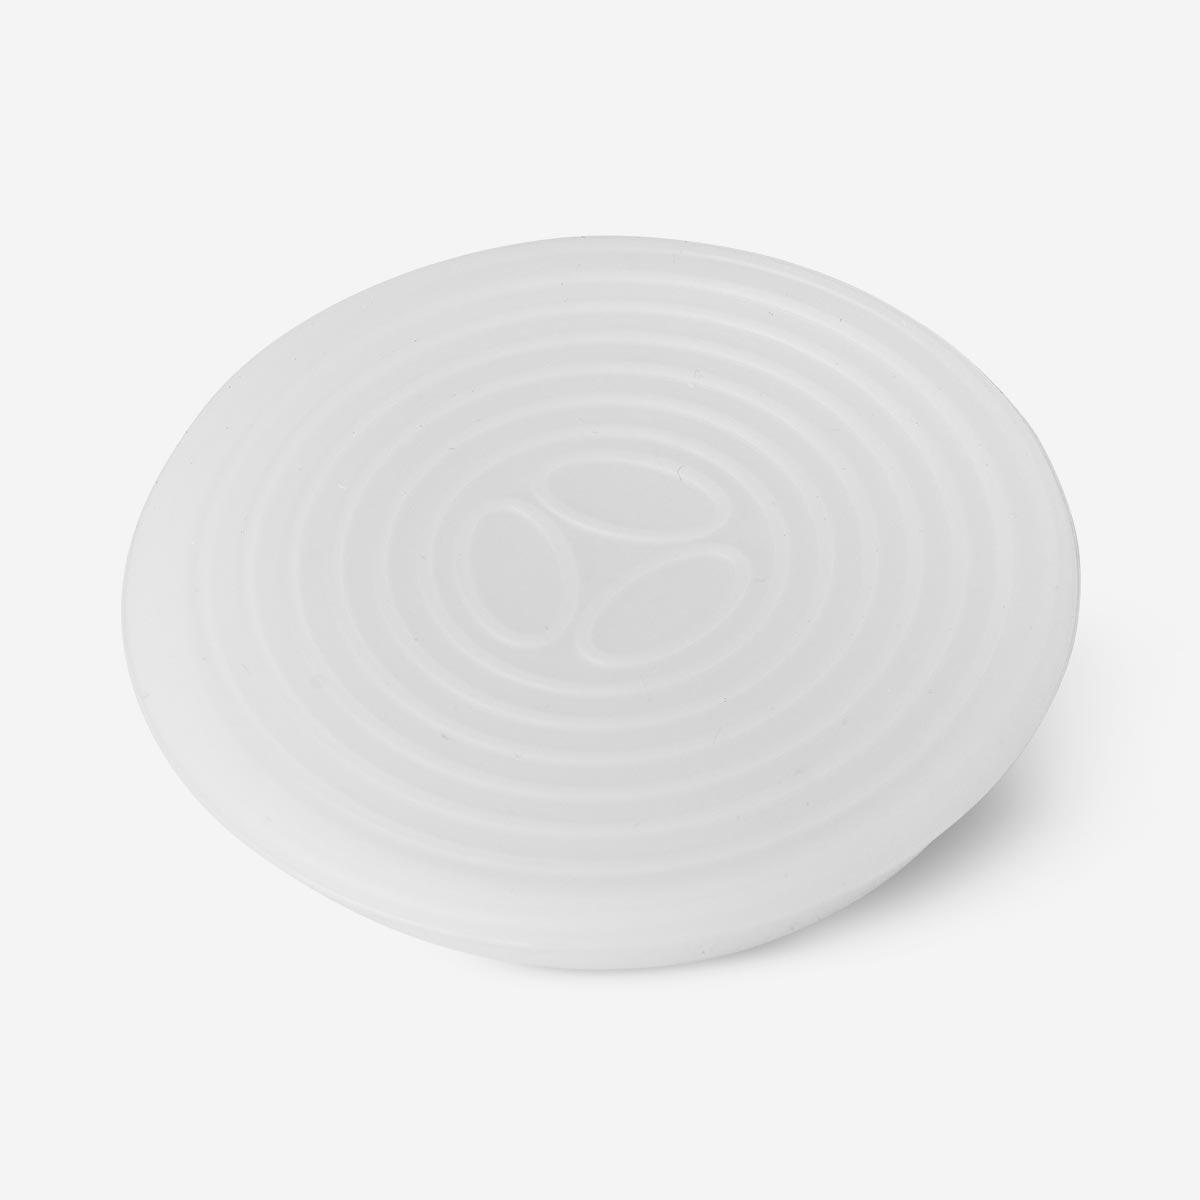 Reusable silicone lids covers